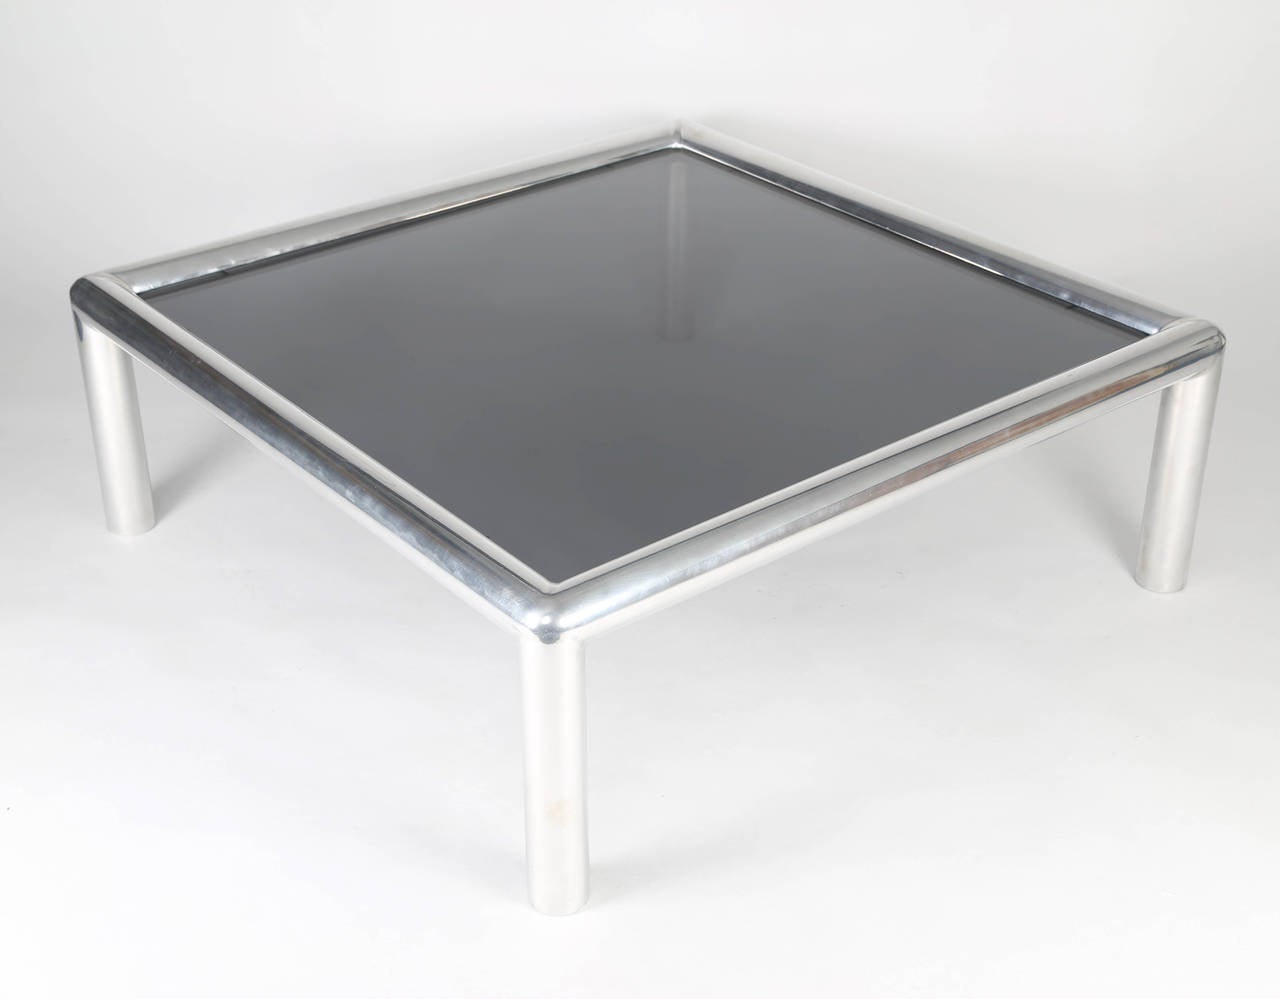 Large, square tubular-aluminum and smoked-glass coffee table from the 